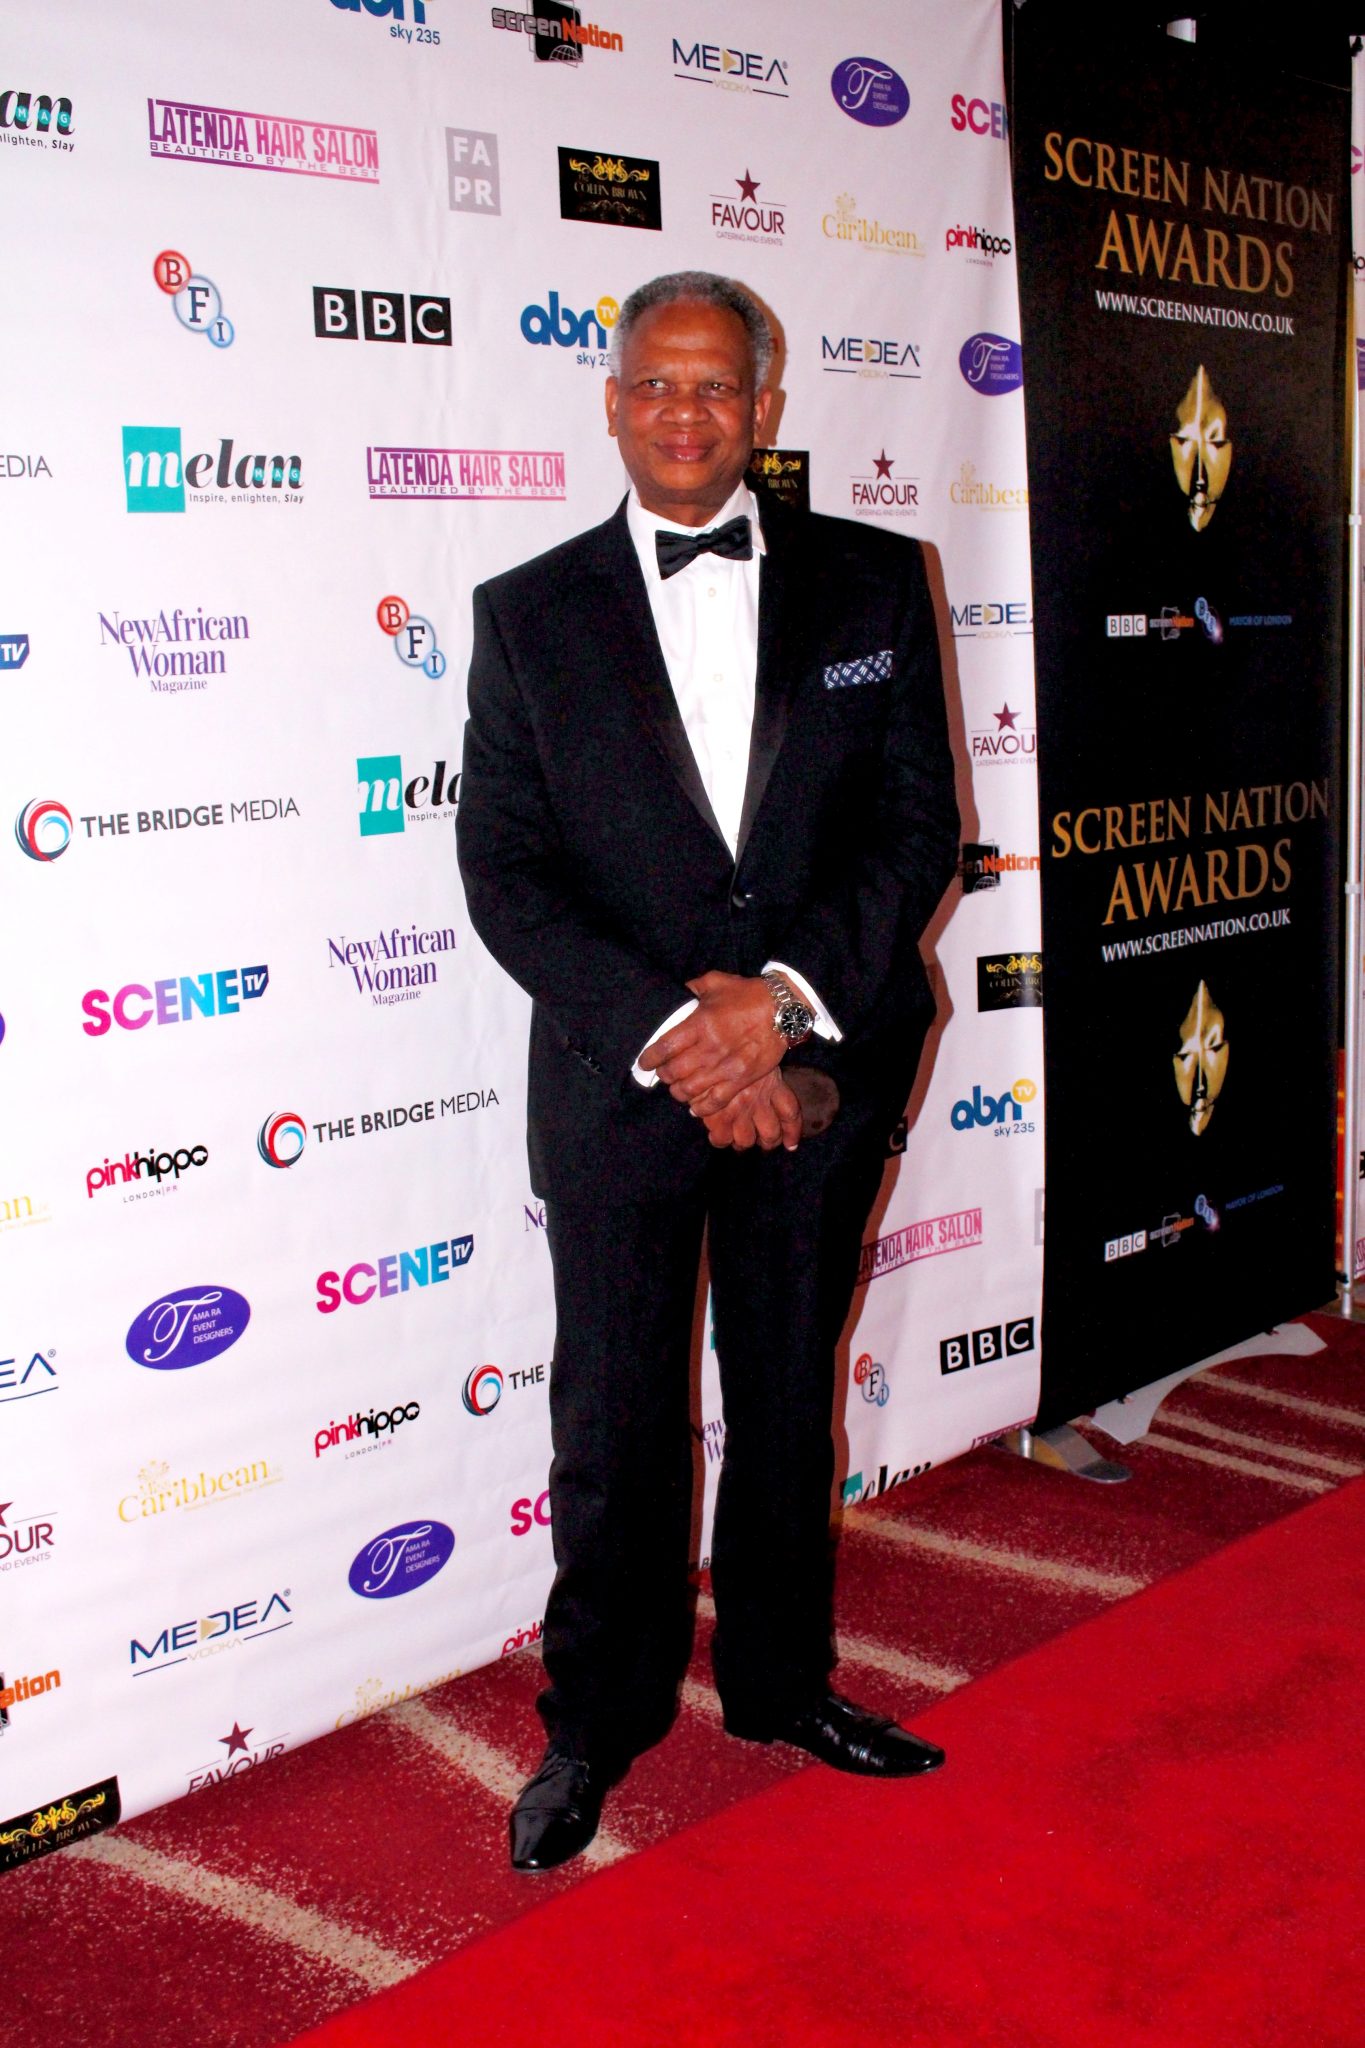 The Screen Nation Film & Television Awards 2017